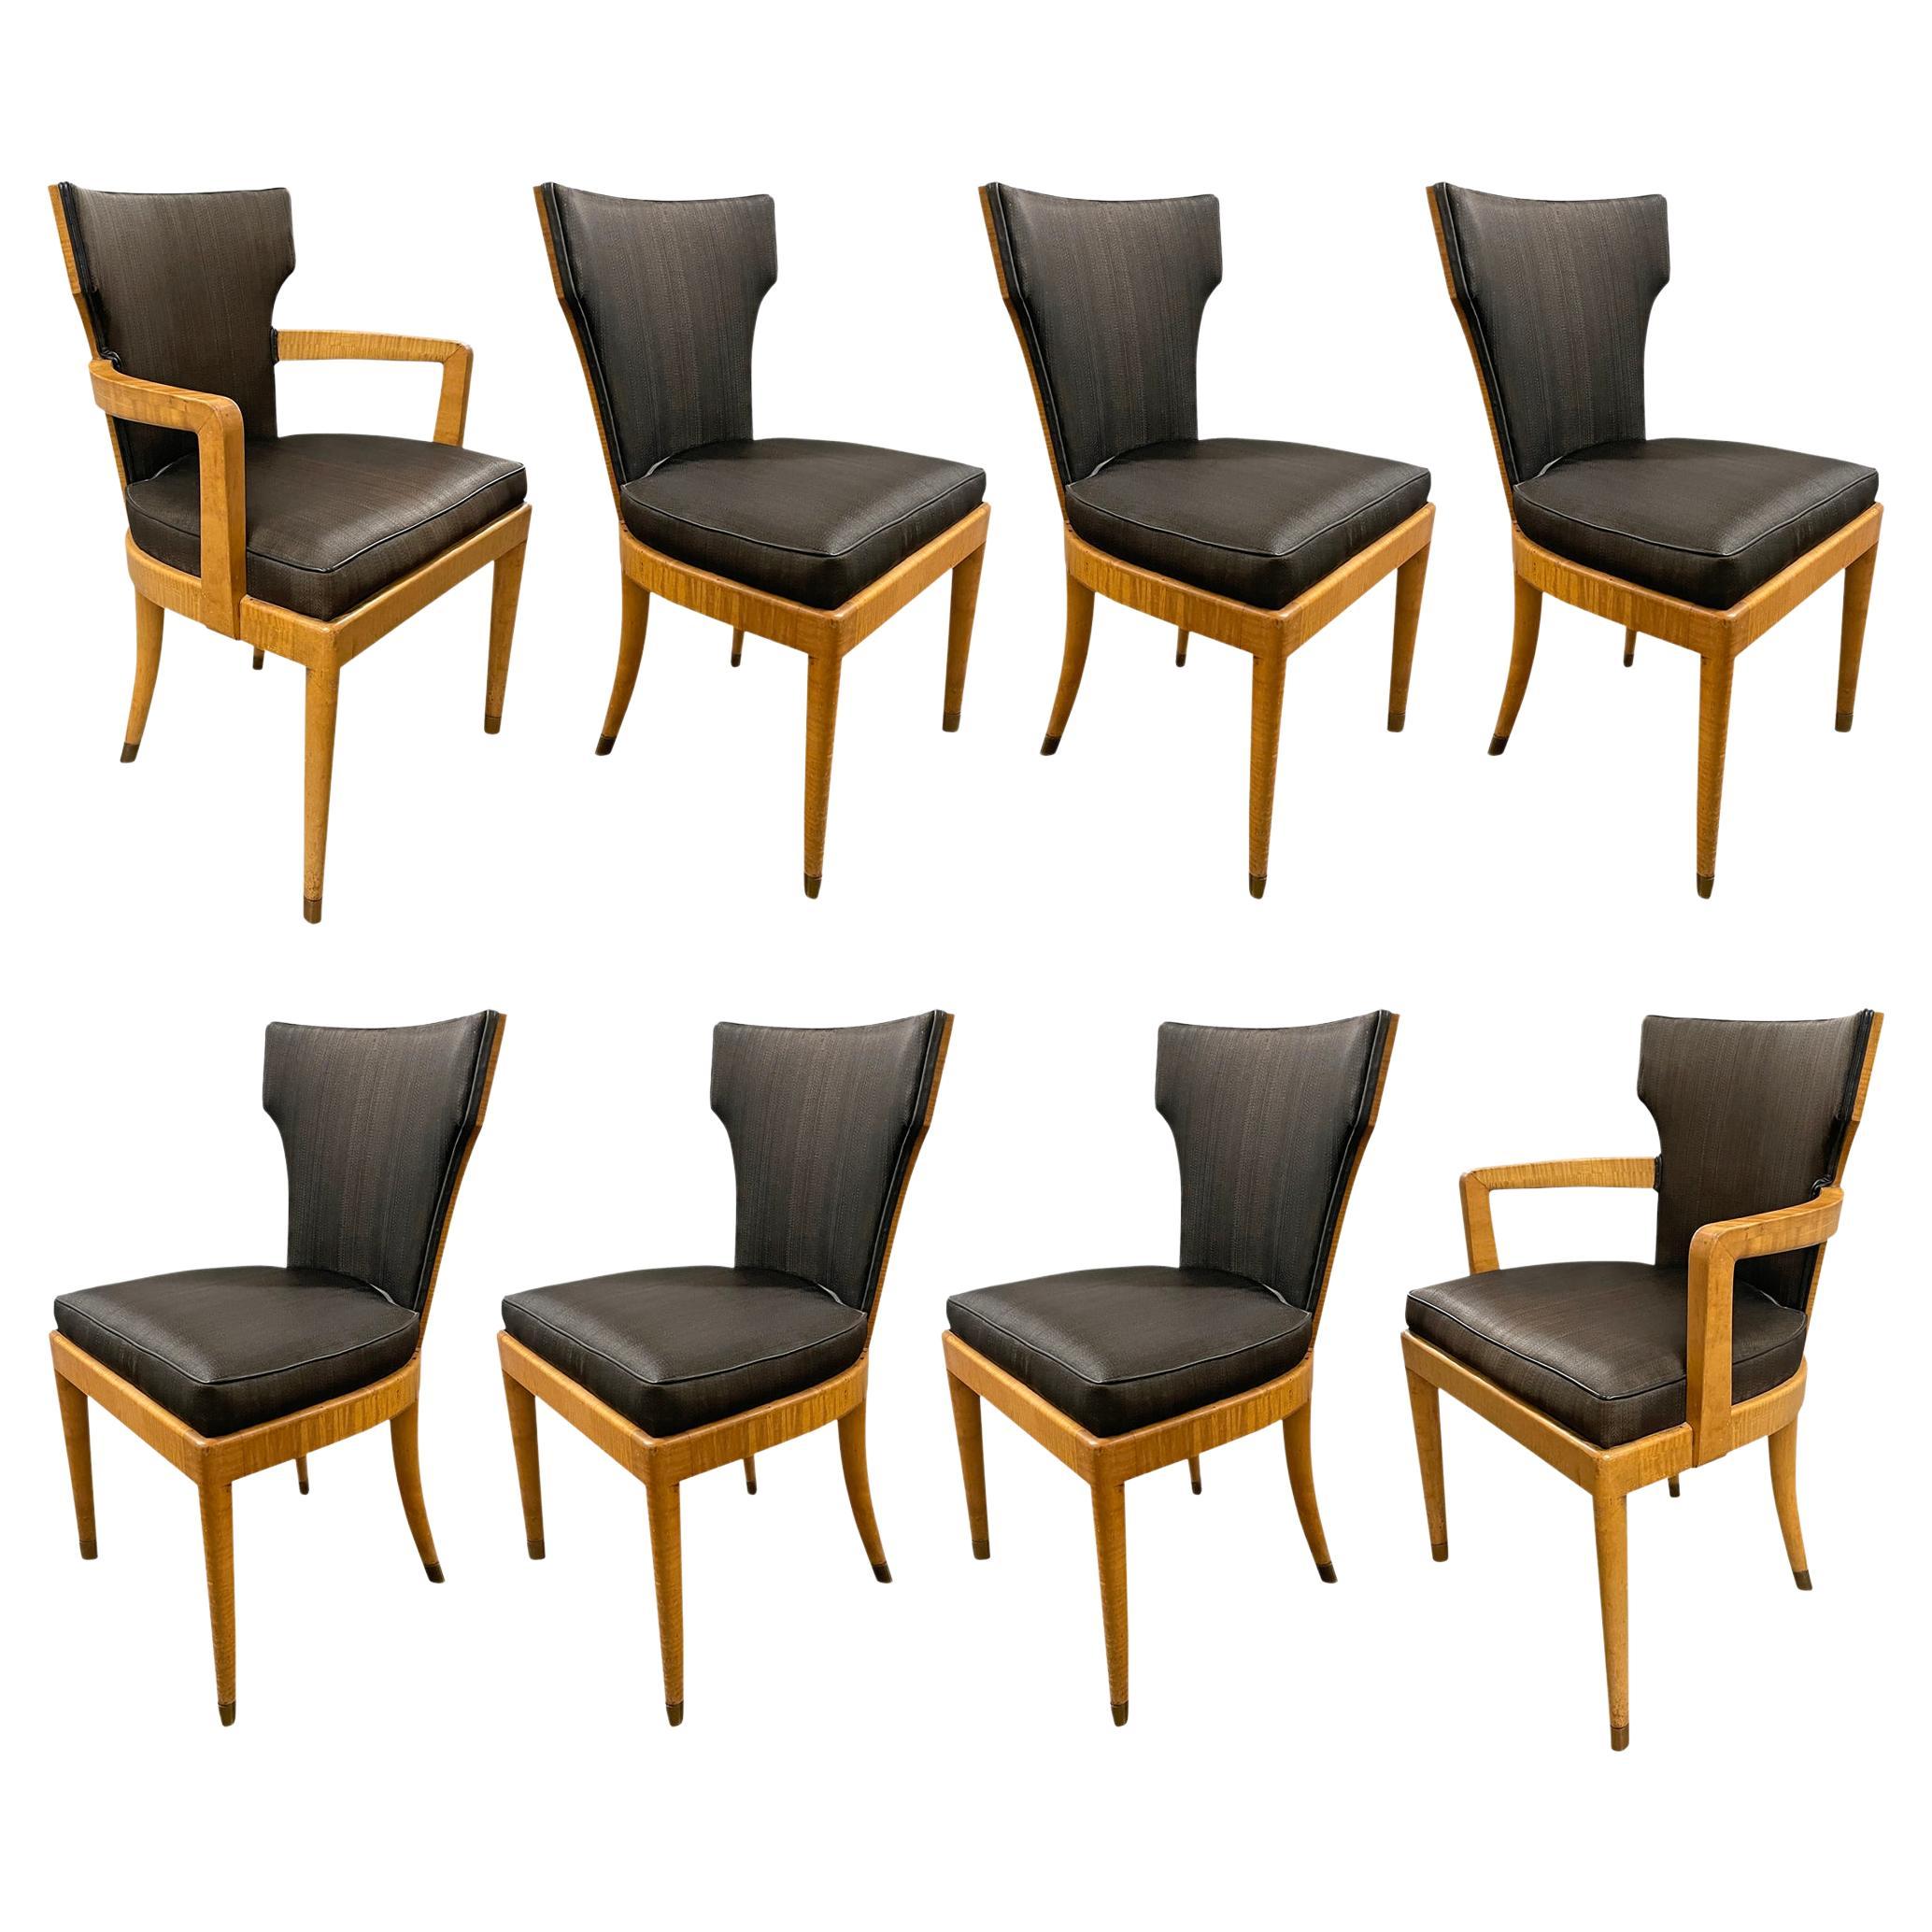 Set of Eight English Art Deco Dining Chairs